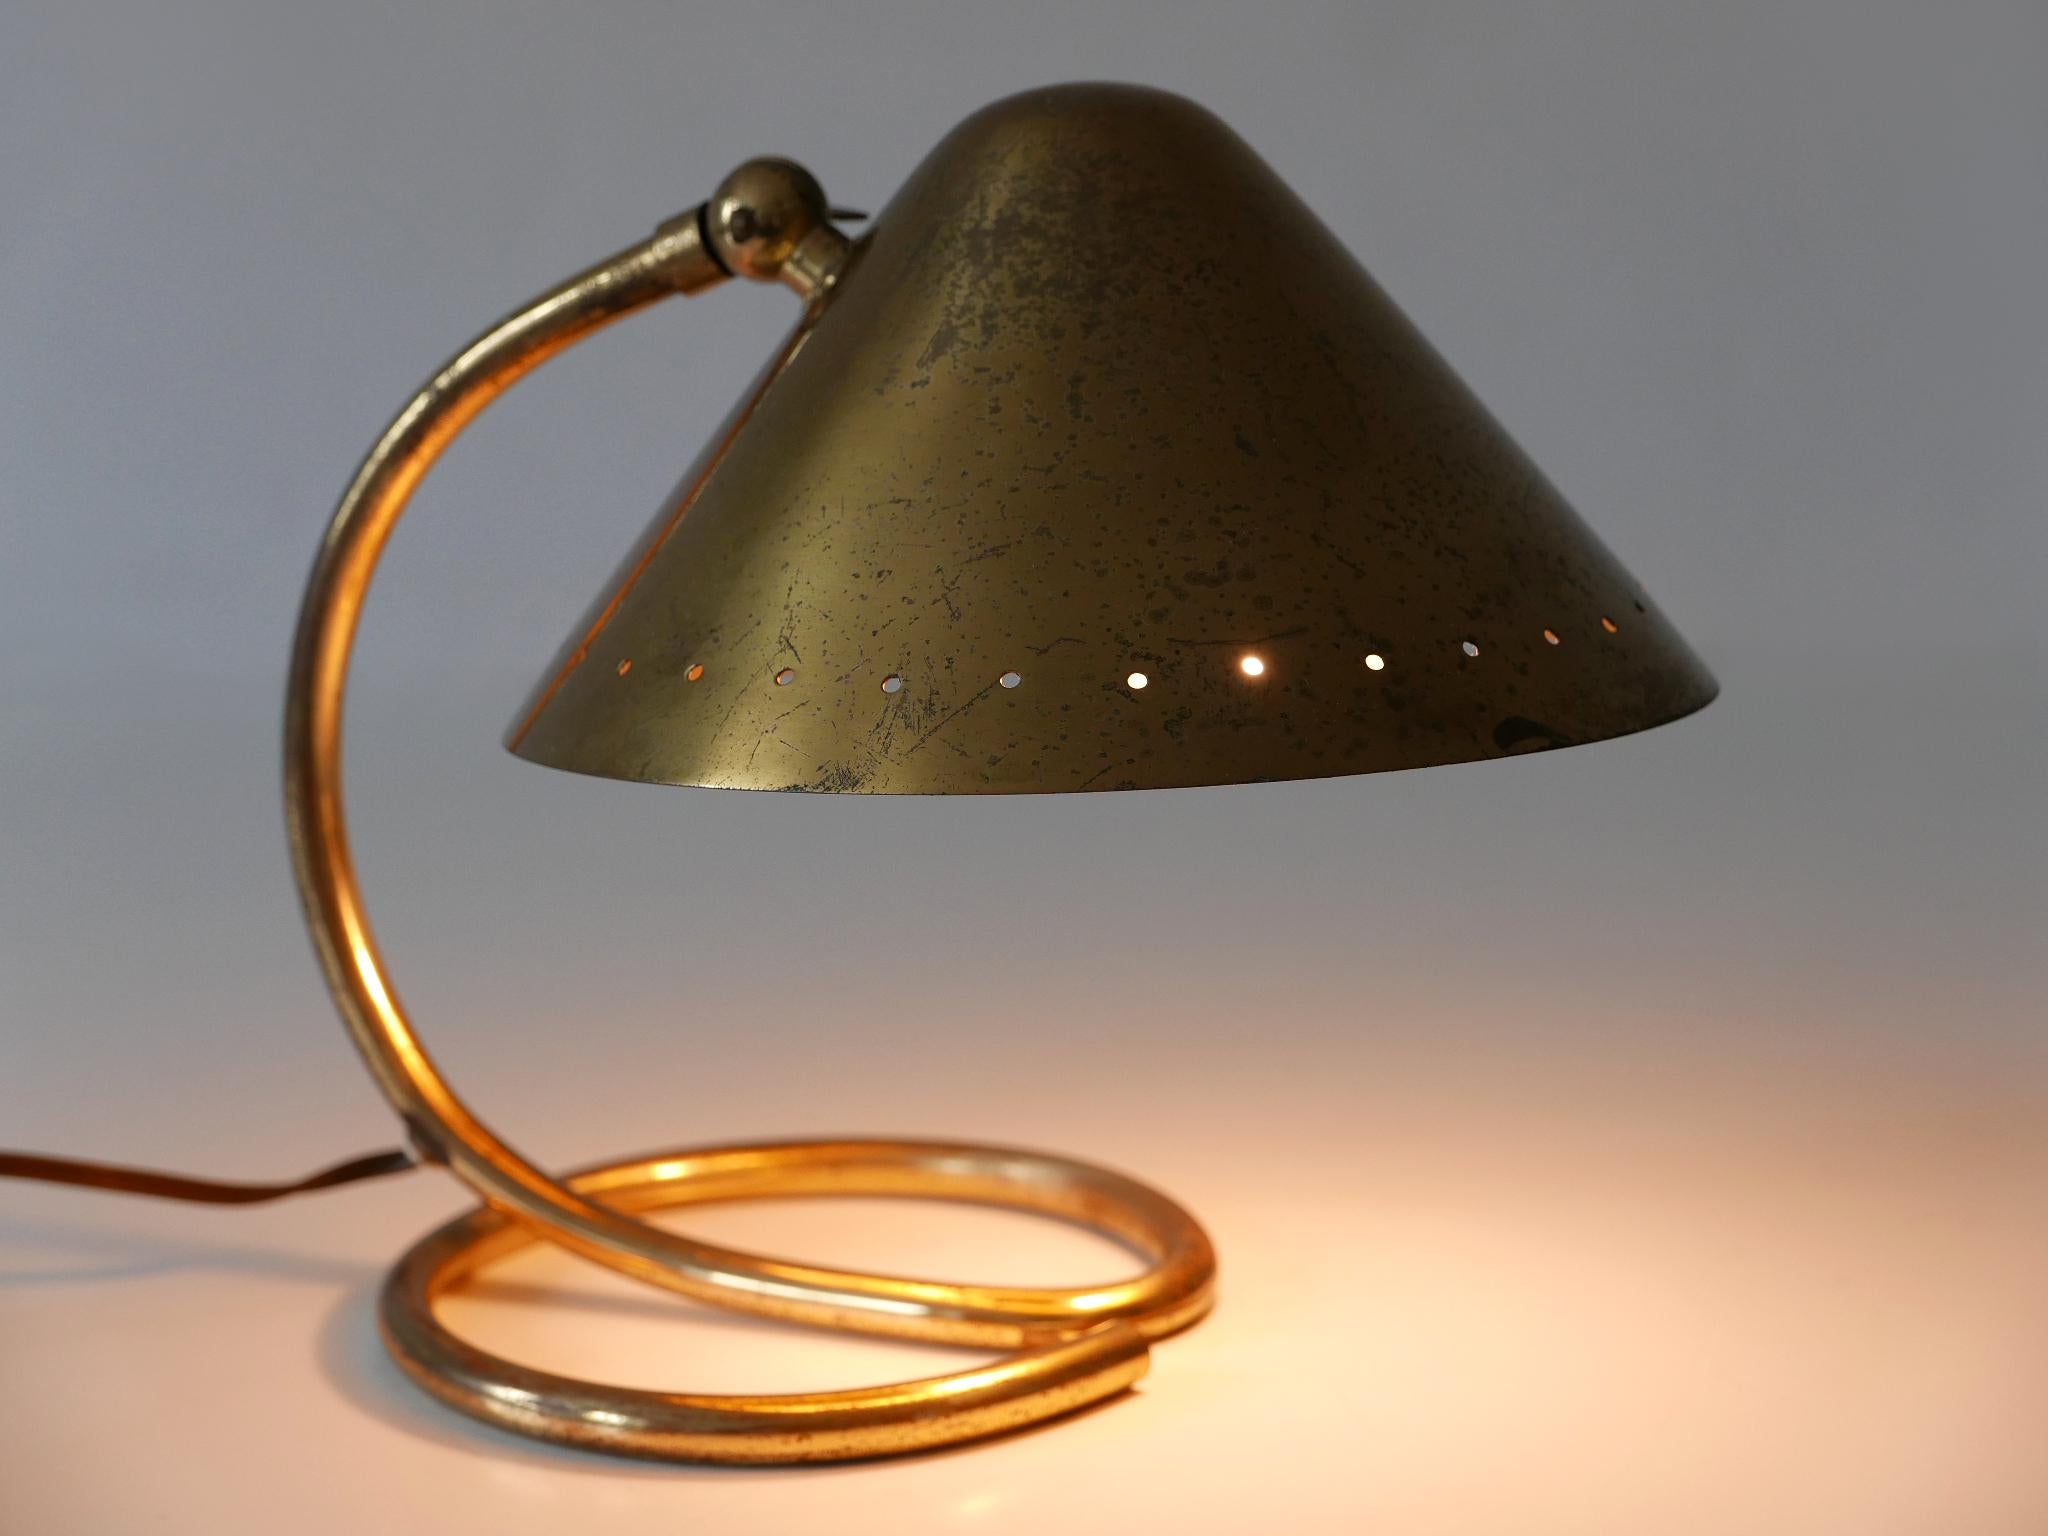 Small and elegant Mid-Century Modern table lamp with adjustable shade. It can be used as wall light as well. Designed and manufactured probably in Sweden, 1950s.

Executed in brass sheet and tube, the lamp comes with 1 x E14 / E12 Edison screw fit